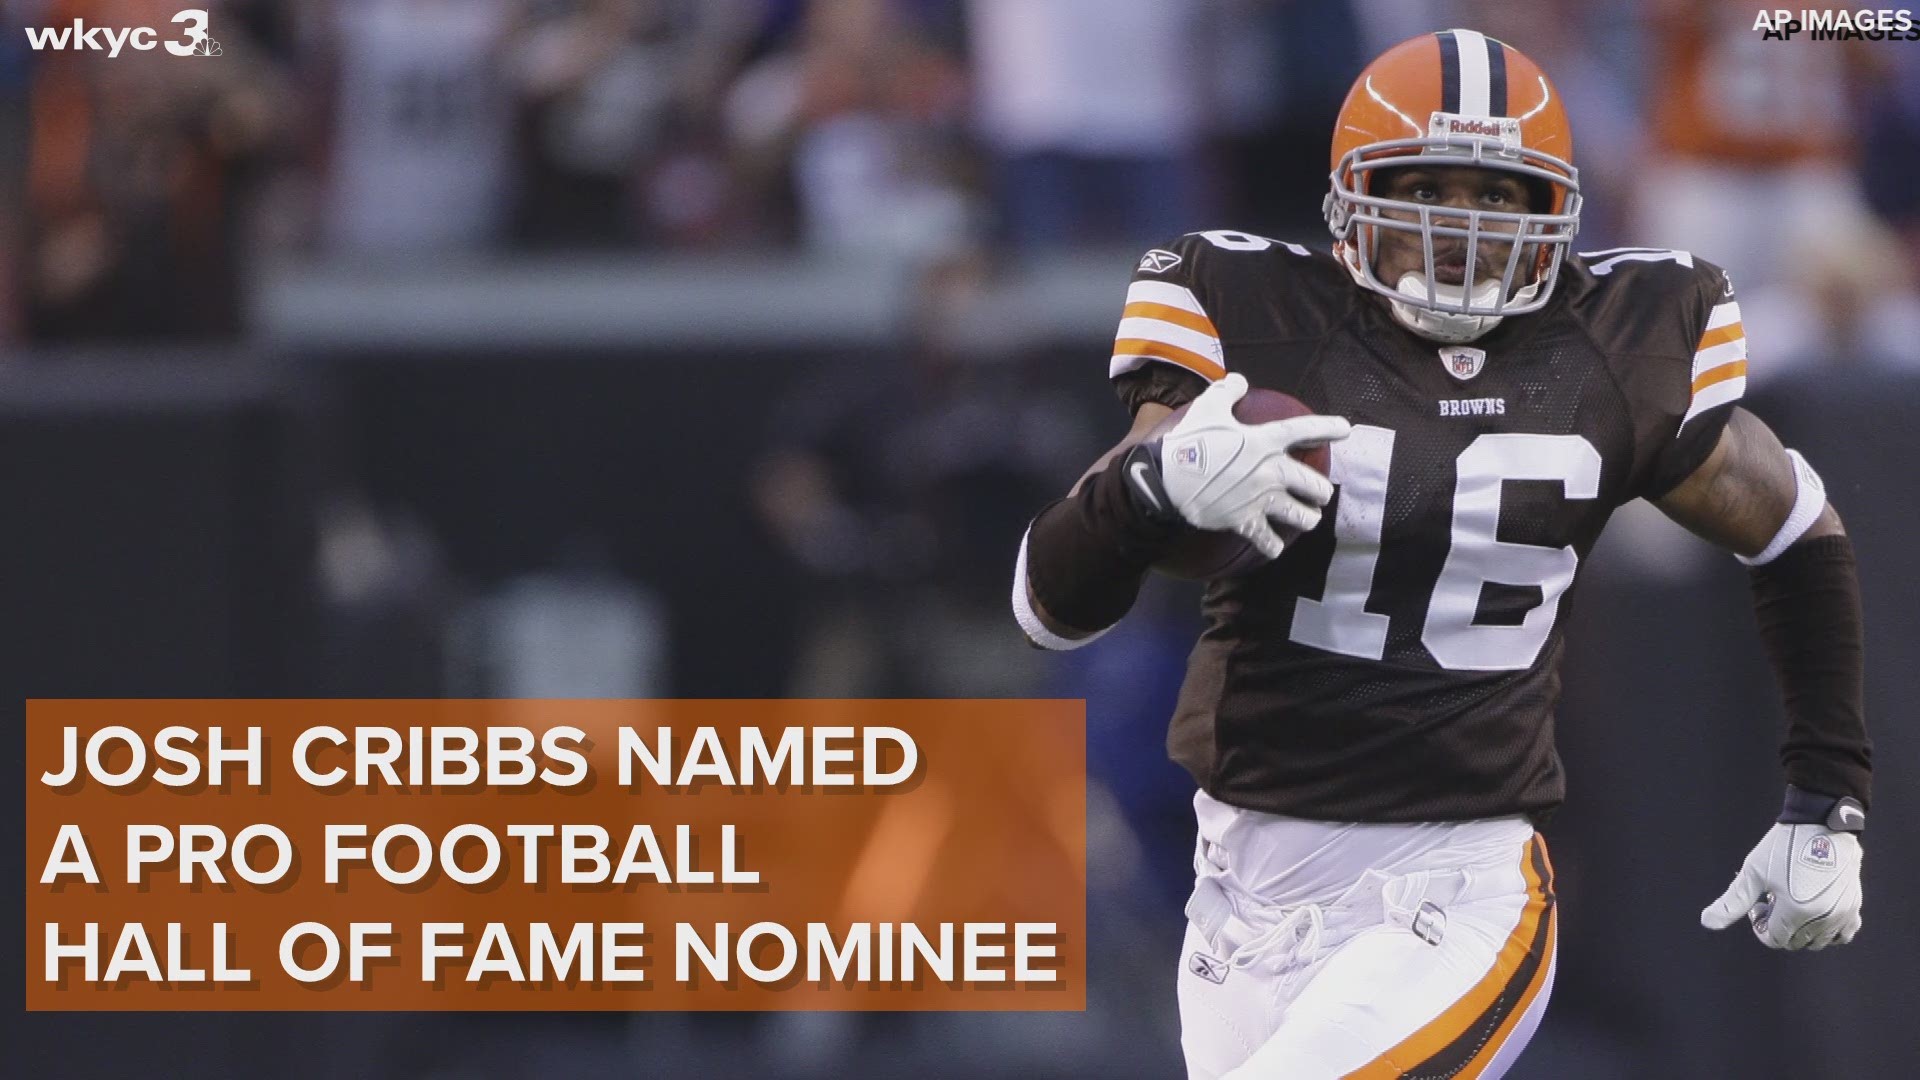 Good luck Josh!  The Pro Football Hall of Fame has announced its 122 nominees for its 2020 class, including former Cleveland Browns kick returner Josh Cribbs.